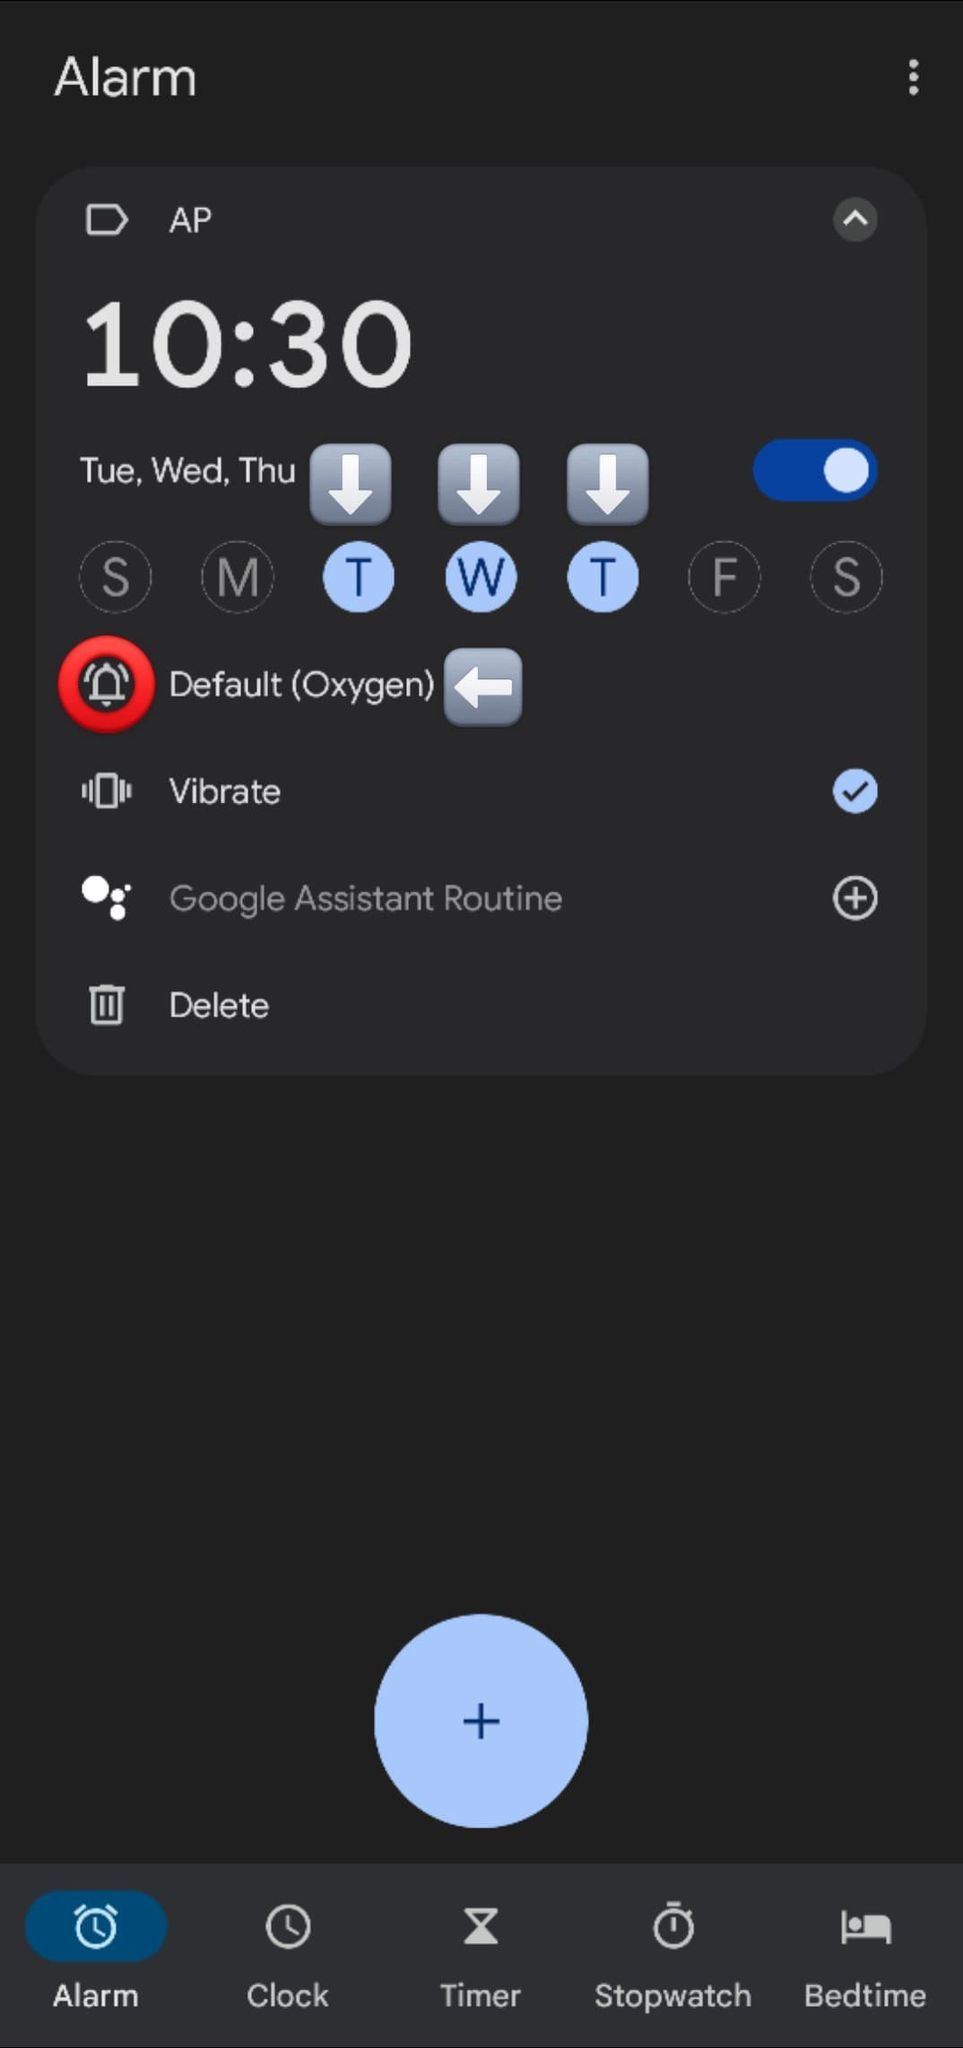 Screenshot showing weekday scheduling and alarm sound customization buttons.